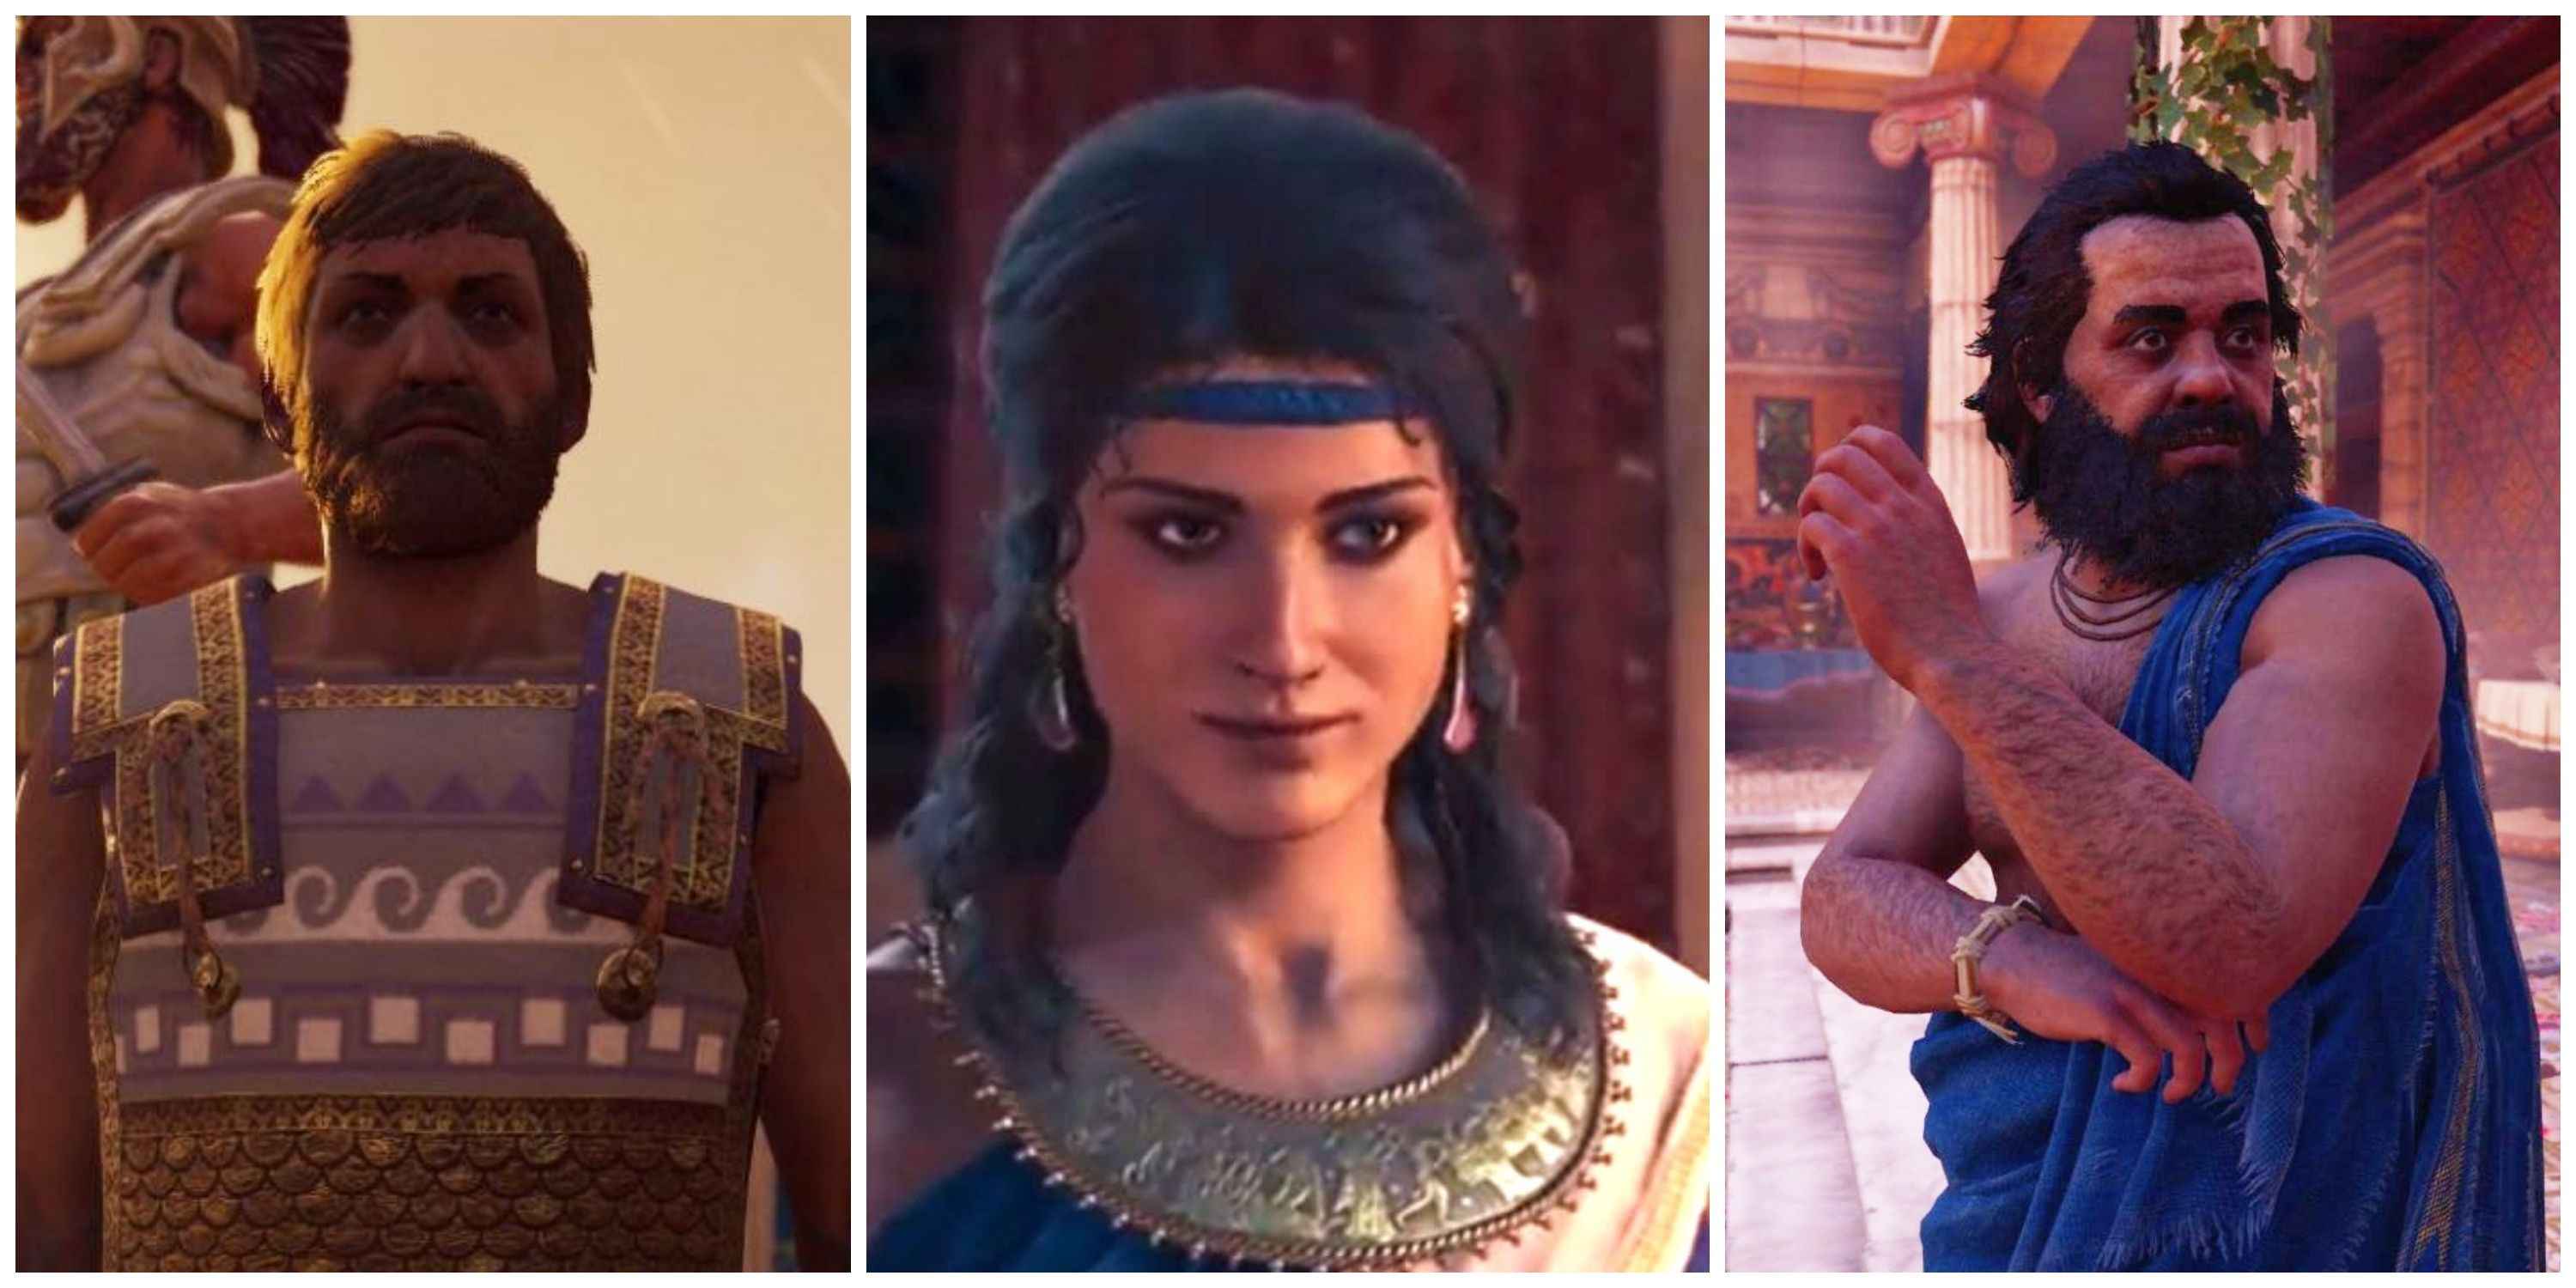 Kleon, Aspasia, and Sokrates in Assassins Creed Odyssey